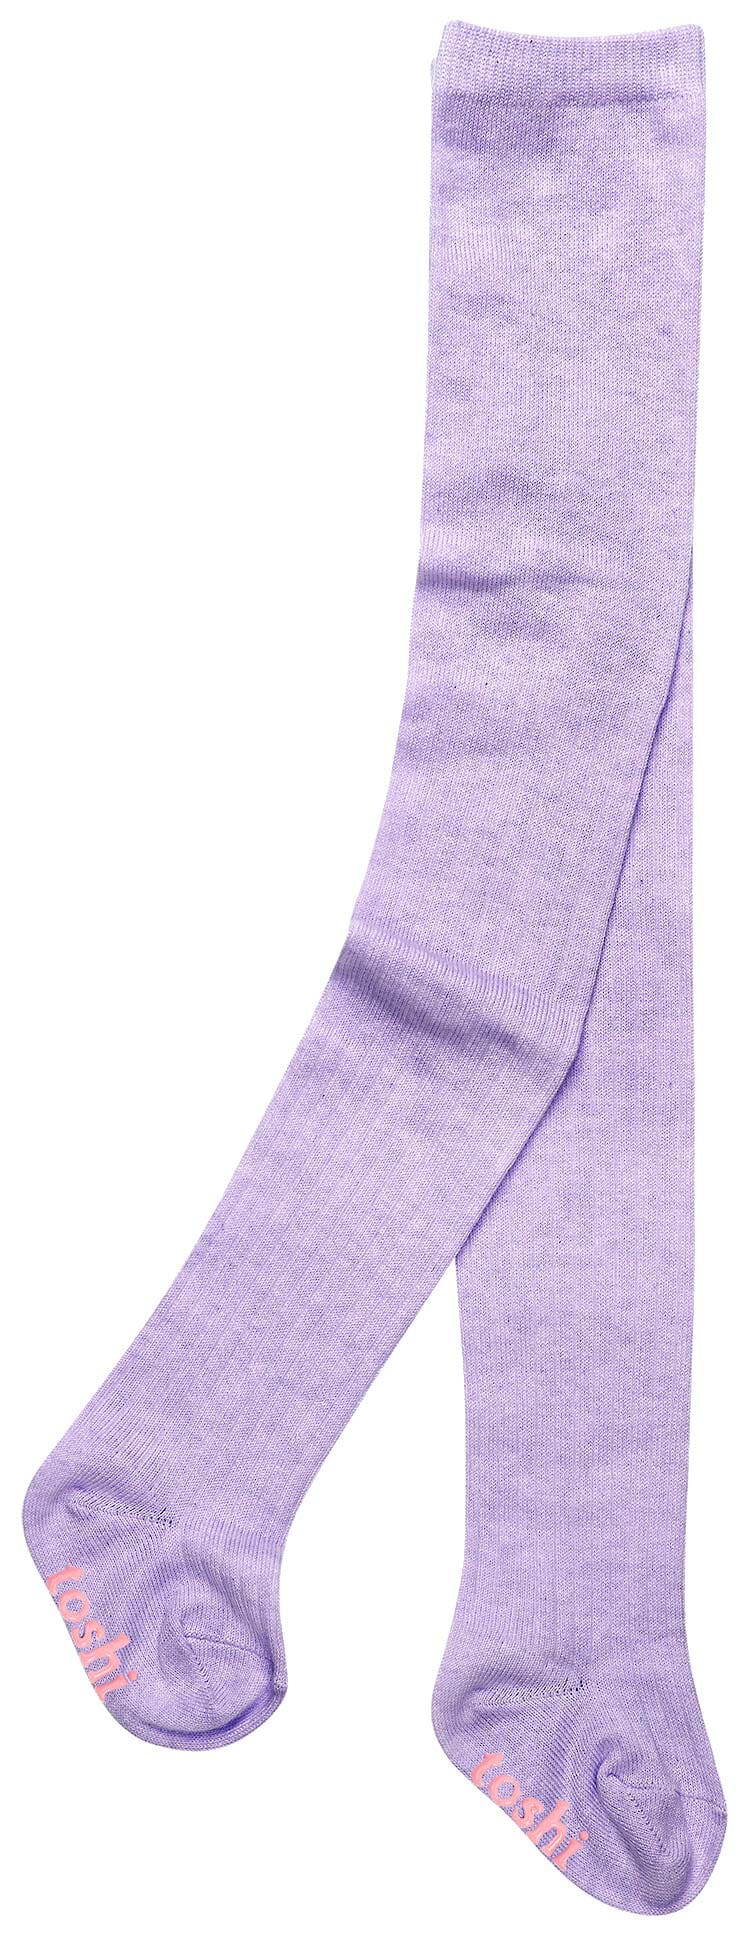 Toshi Organic Dreamtime Footed Tights - Amethyst Tights Toshi 